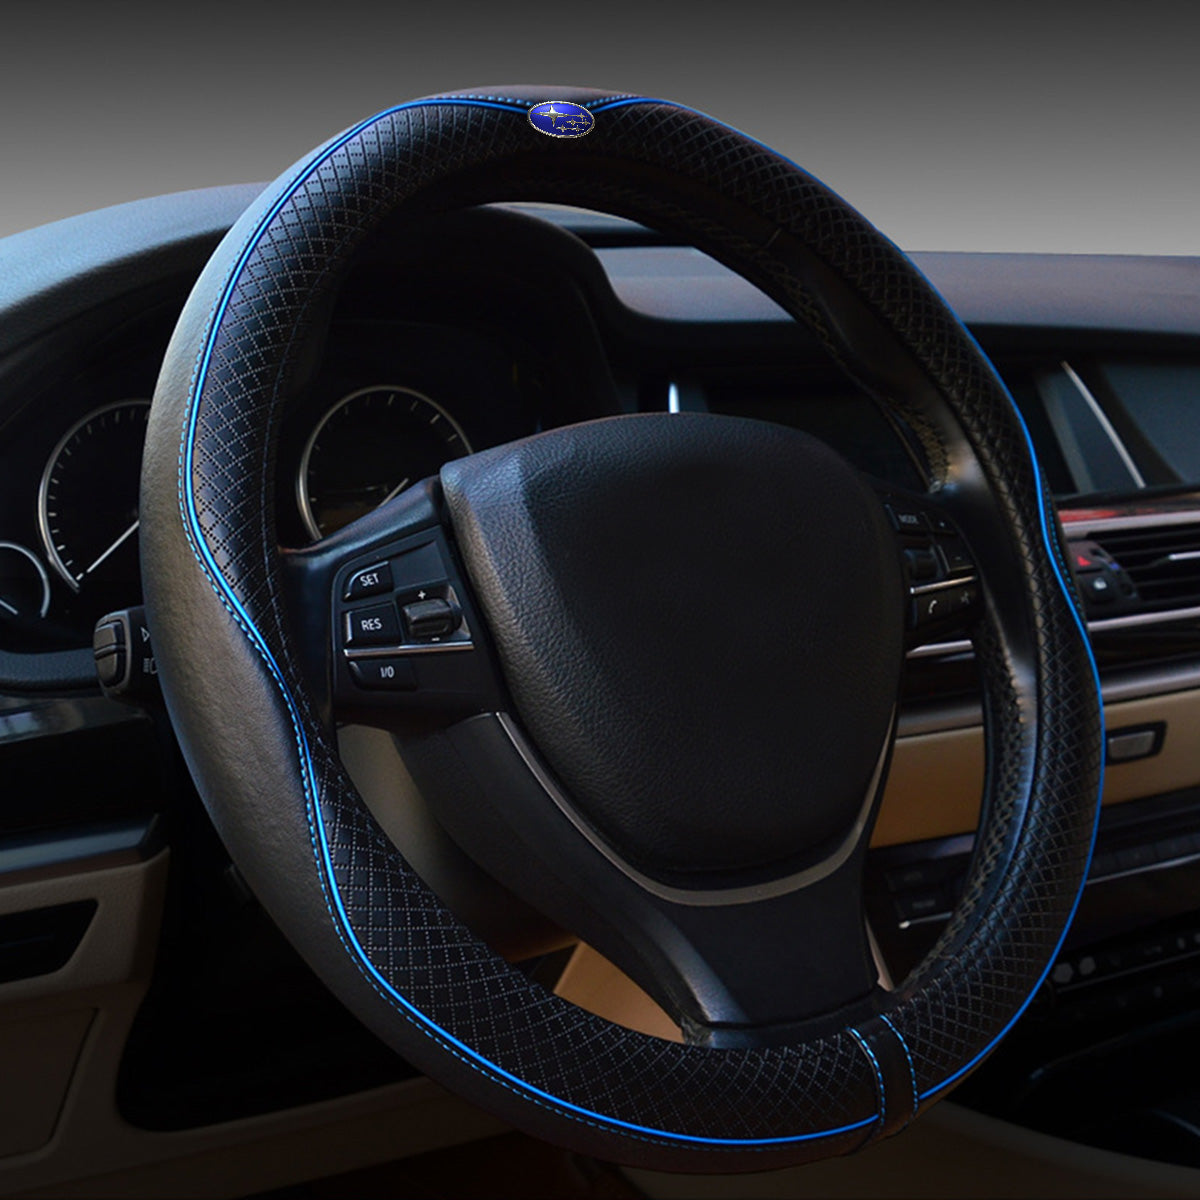 Enhance Your Ride with a Stylish Subaru Steering Wheel Cover